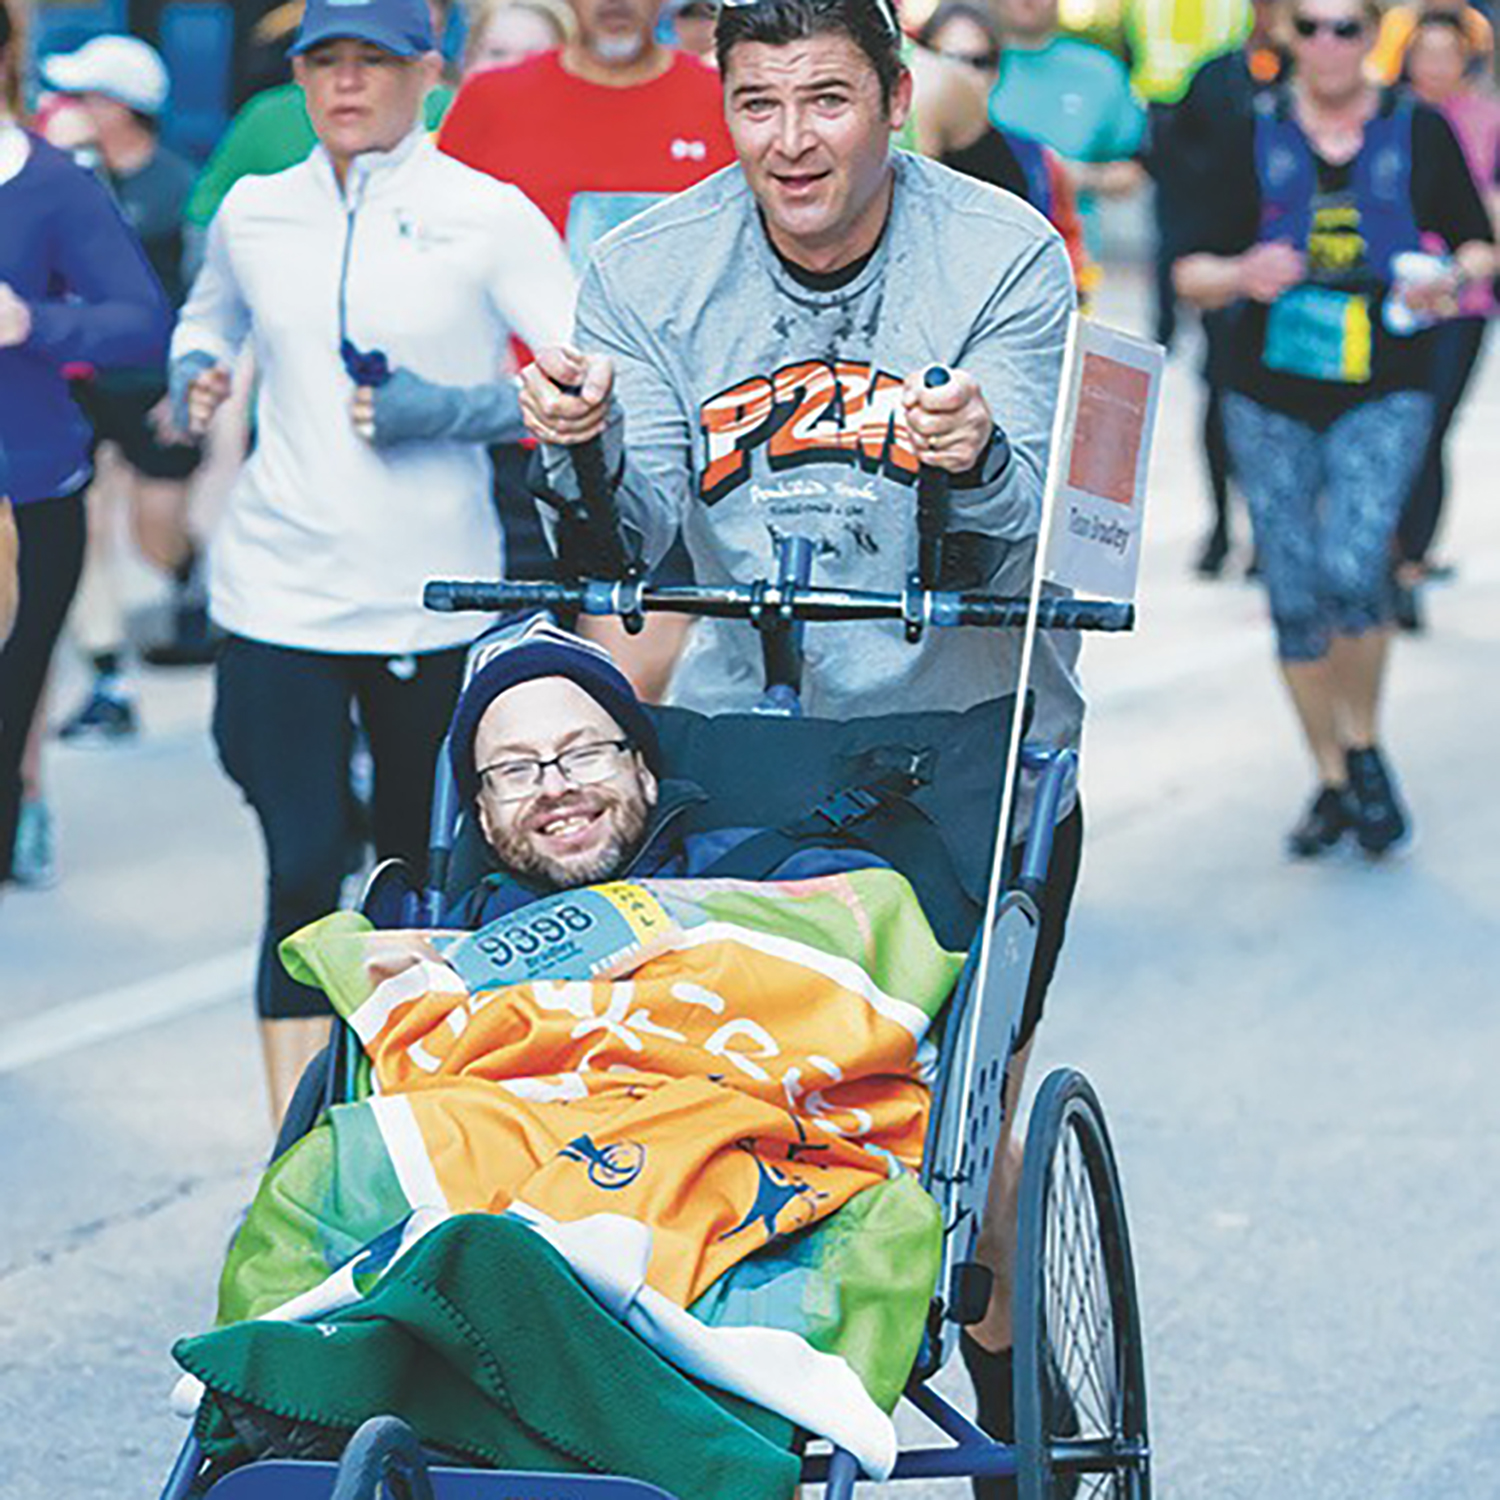 A runner pushes a person in a wheelchair in a group race